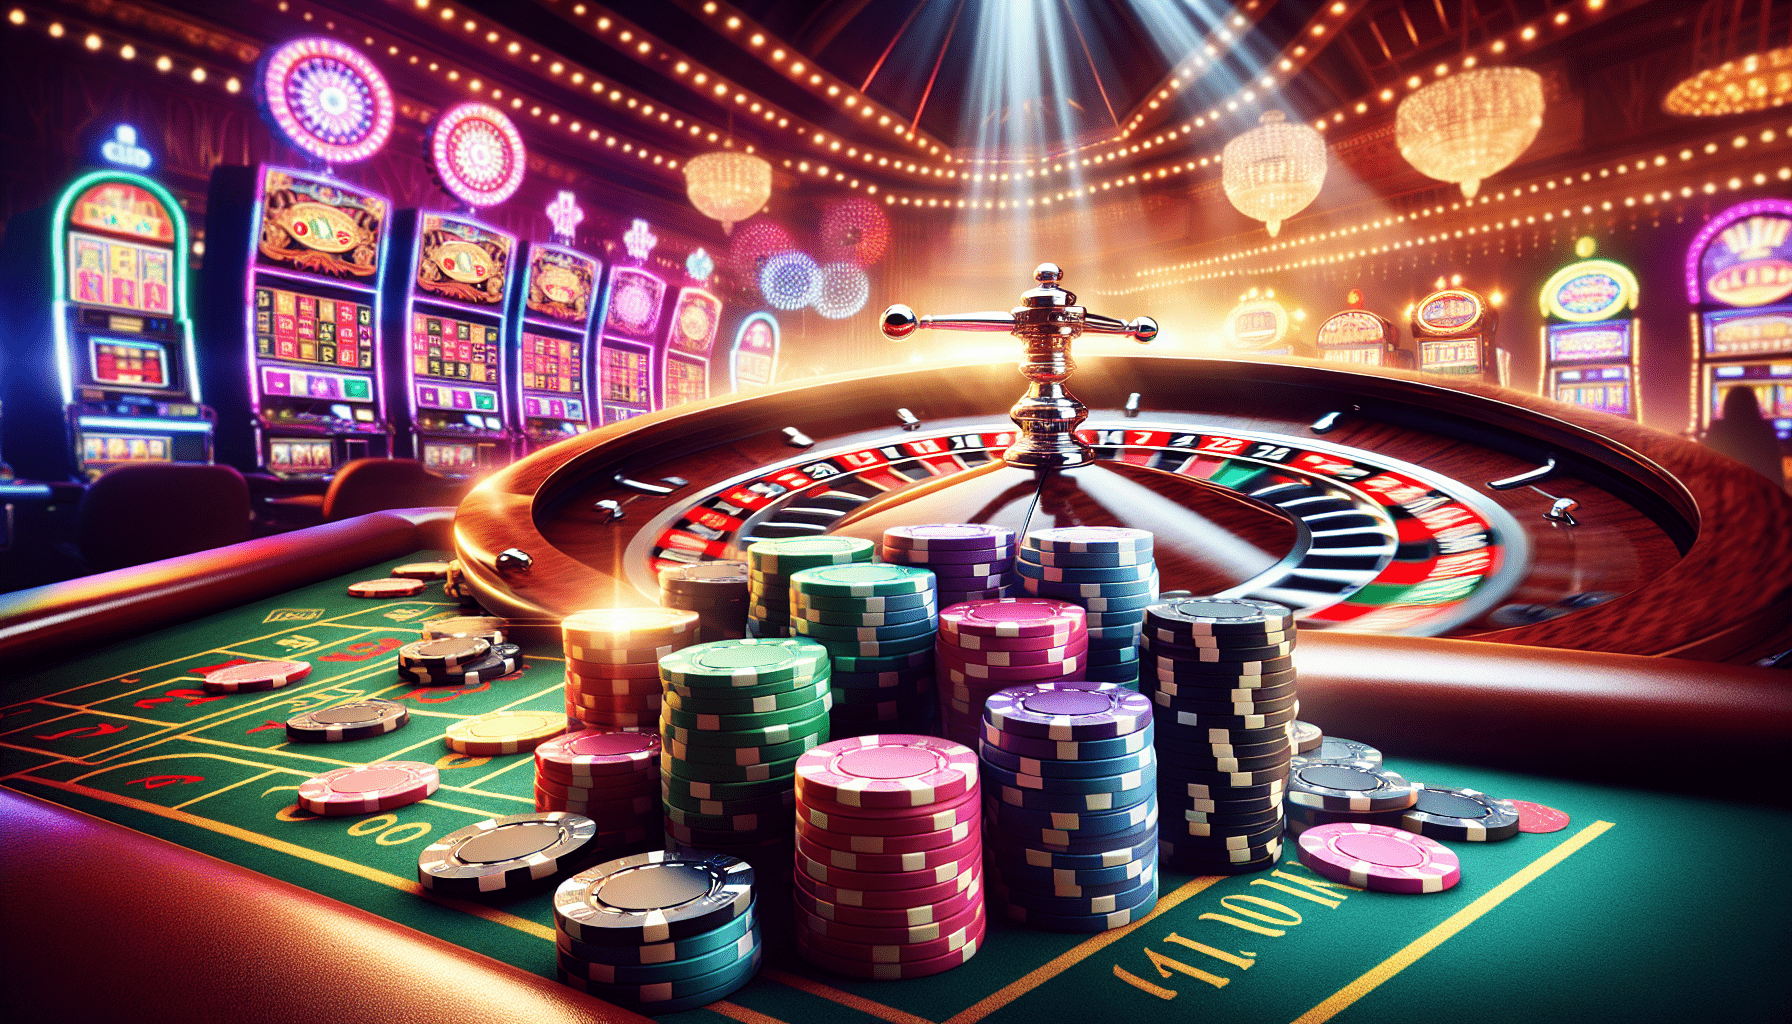 Do Casinos Have To Cash You Out?